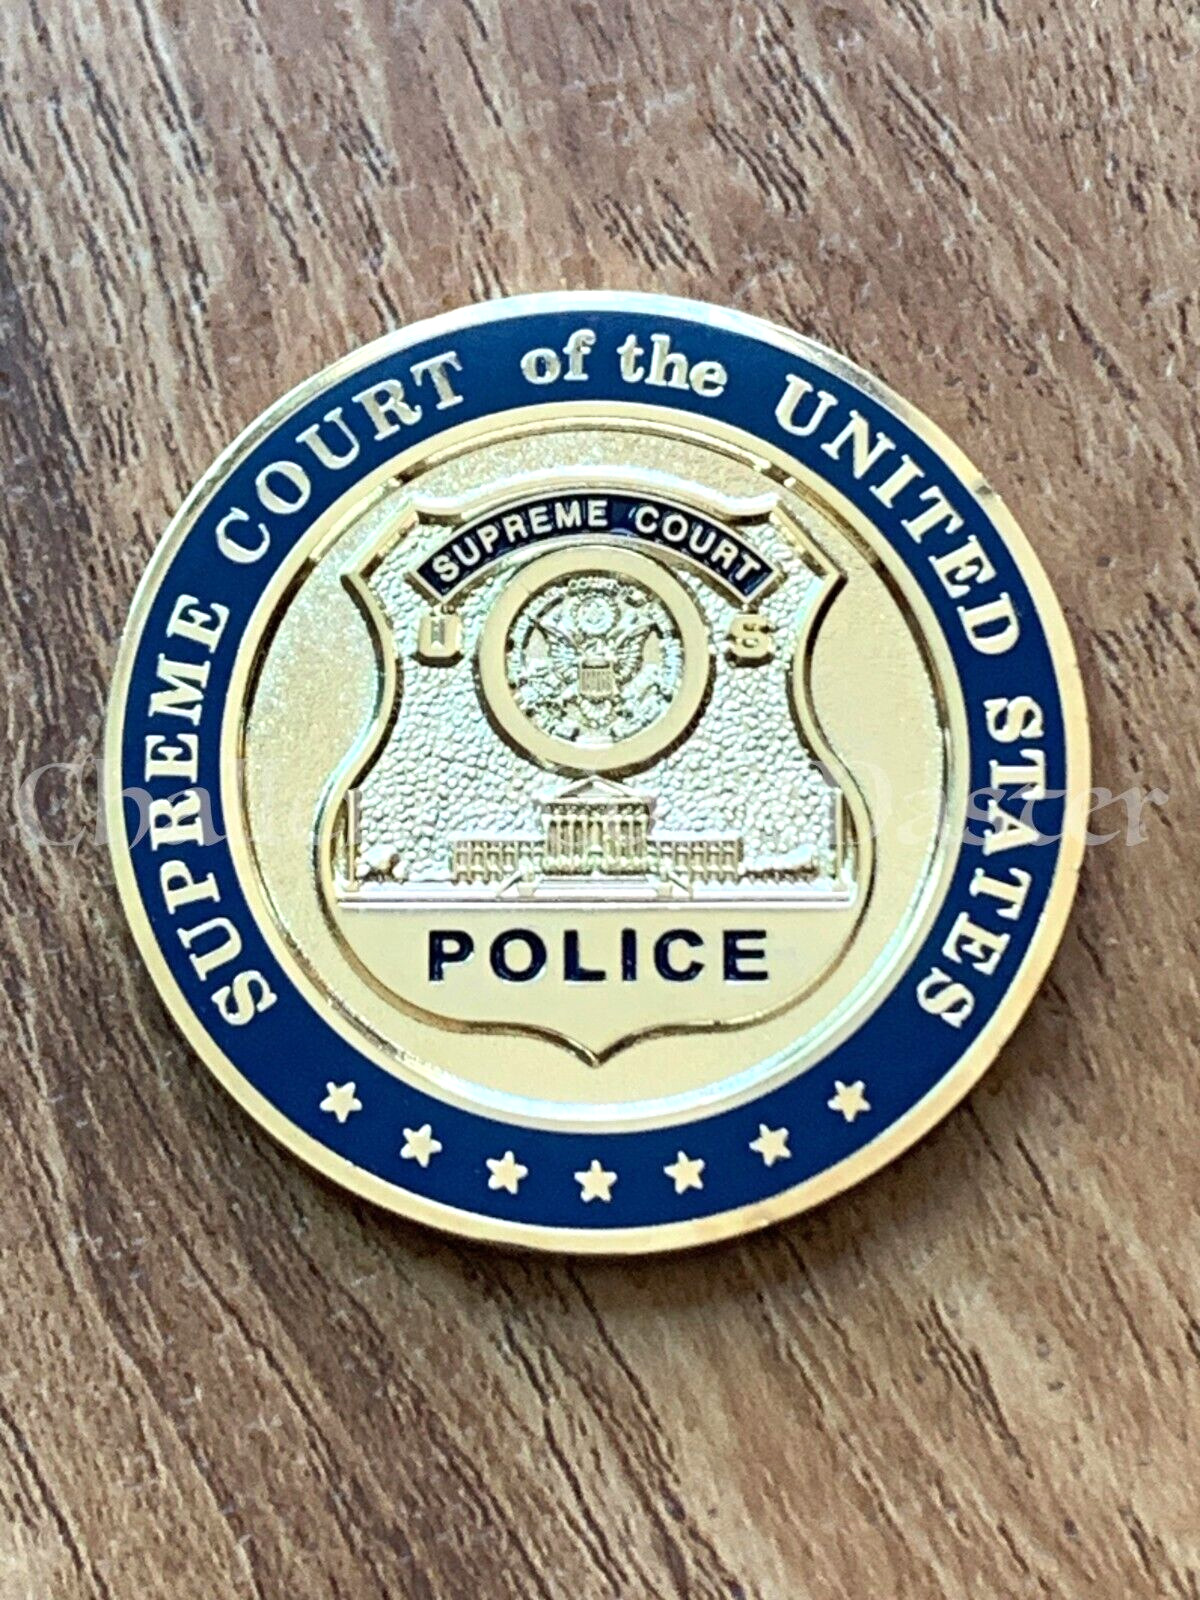 E87 Supreme Court of The United States Police Challenge Coin